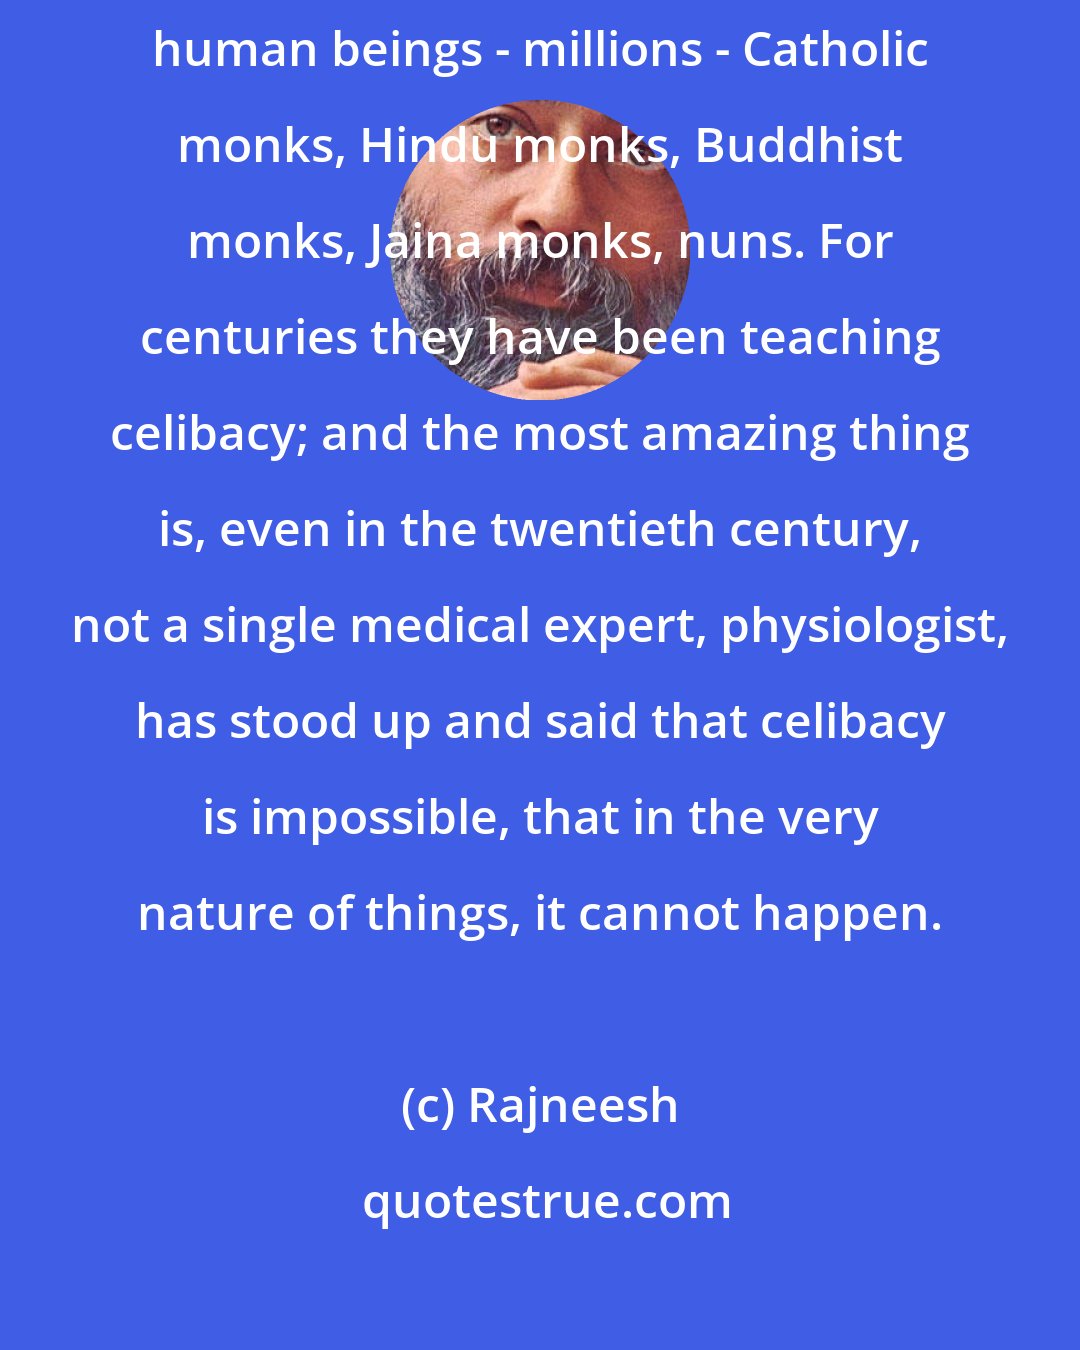 Rajneesh: Celibacy is one of the most unnatural things. It has destroyed so many human beings - millions - Catholic monks, Hindu monks, Buddhist monks, Jaina monks, nuns. For centuries they have been teaching celibacy; and the most amazing thing is, even in the twentieth century, not a single medical expert, physiologist, has stood up and said that celibacy is impossible, that in the very nature of things, it cannot happen.